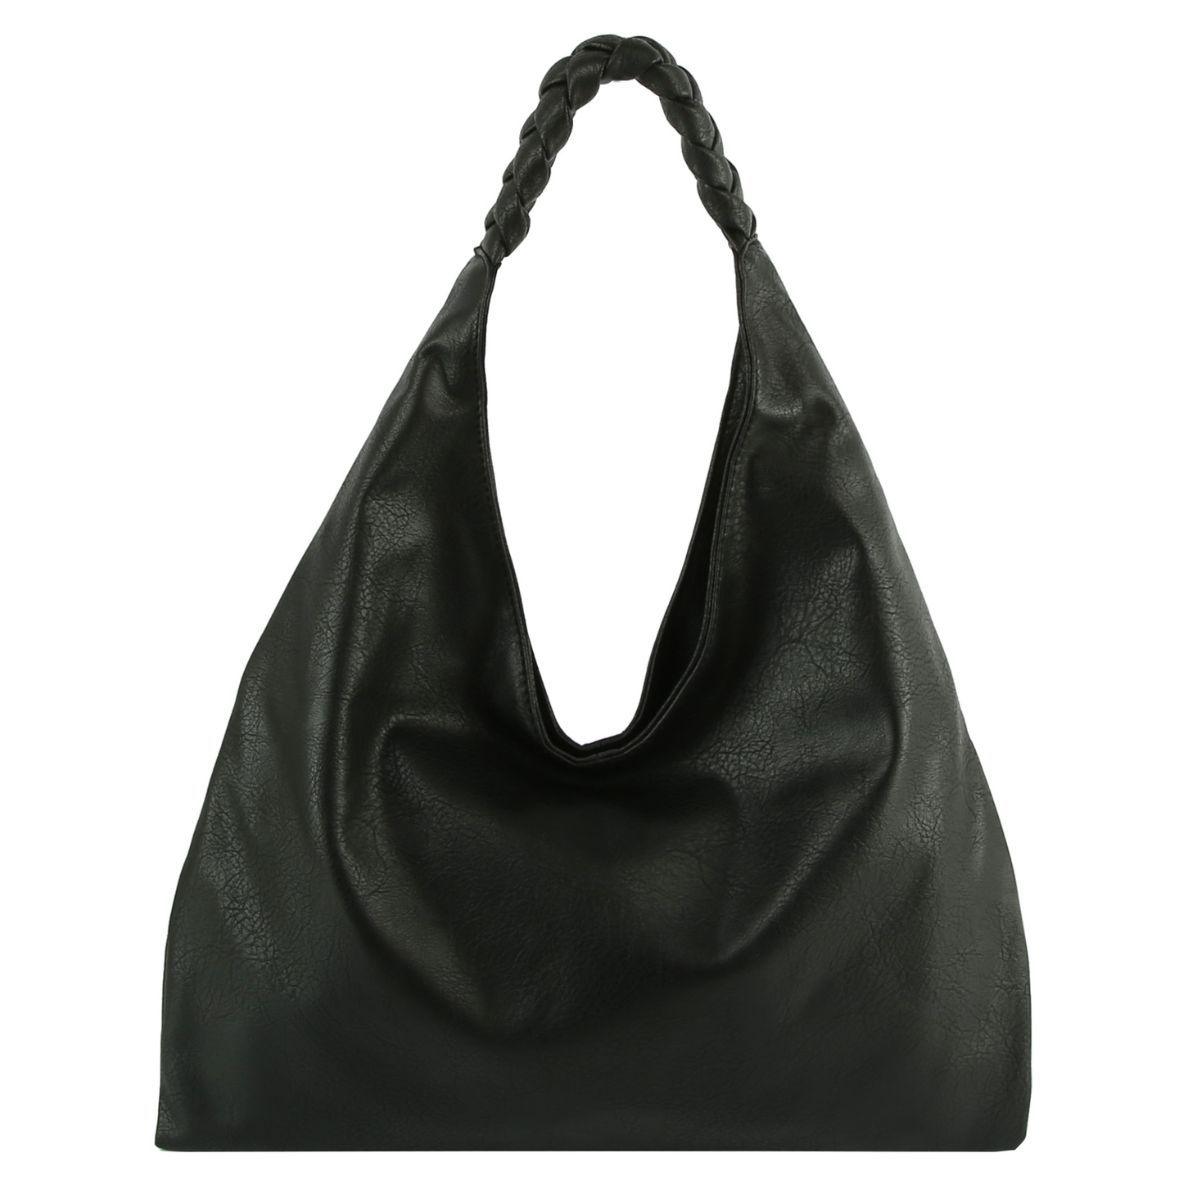 Stylish Black Vegan Leather Hobo Bag: Perfect Mix of Fashion and Function for Everyday Use